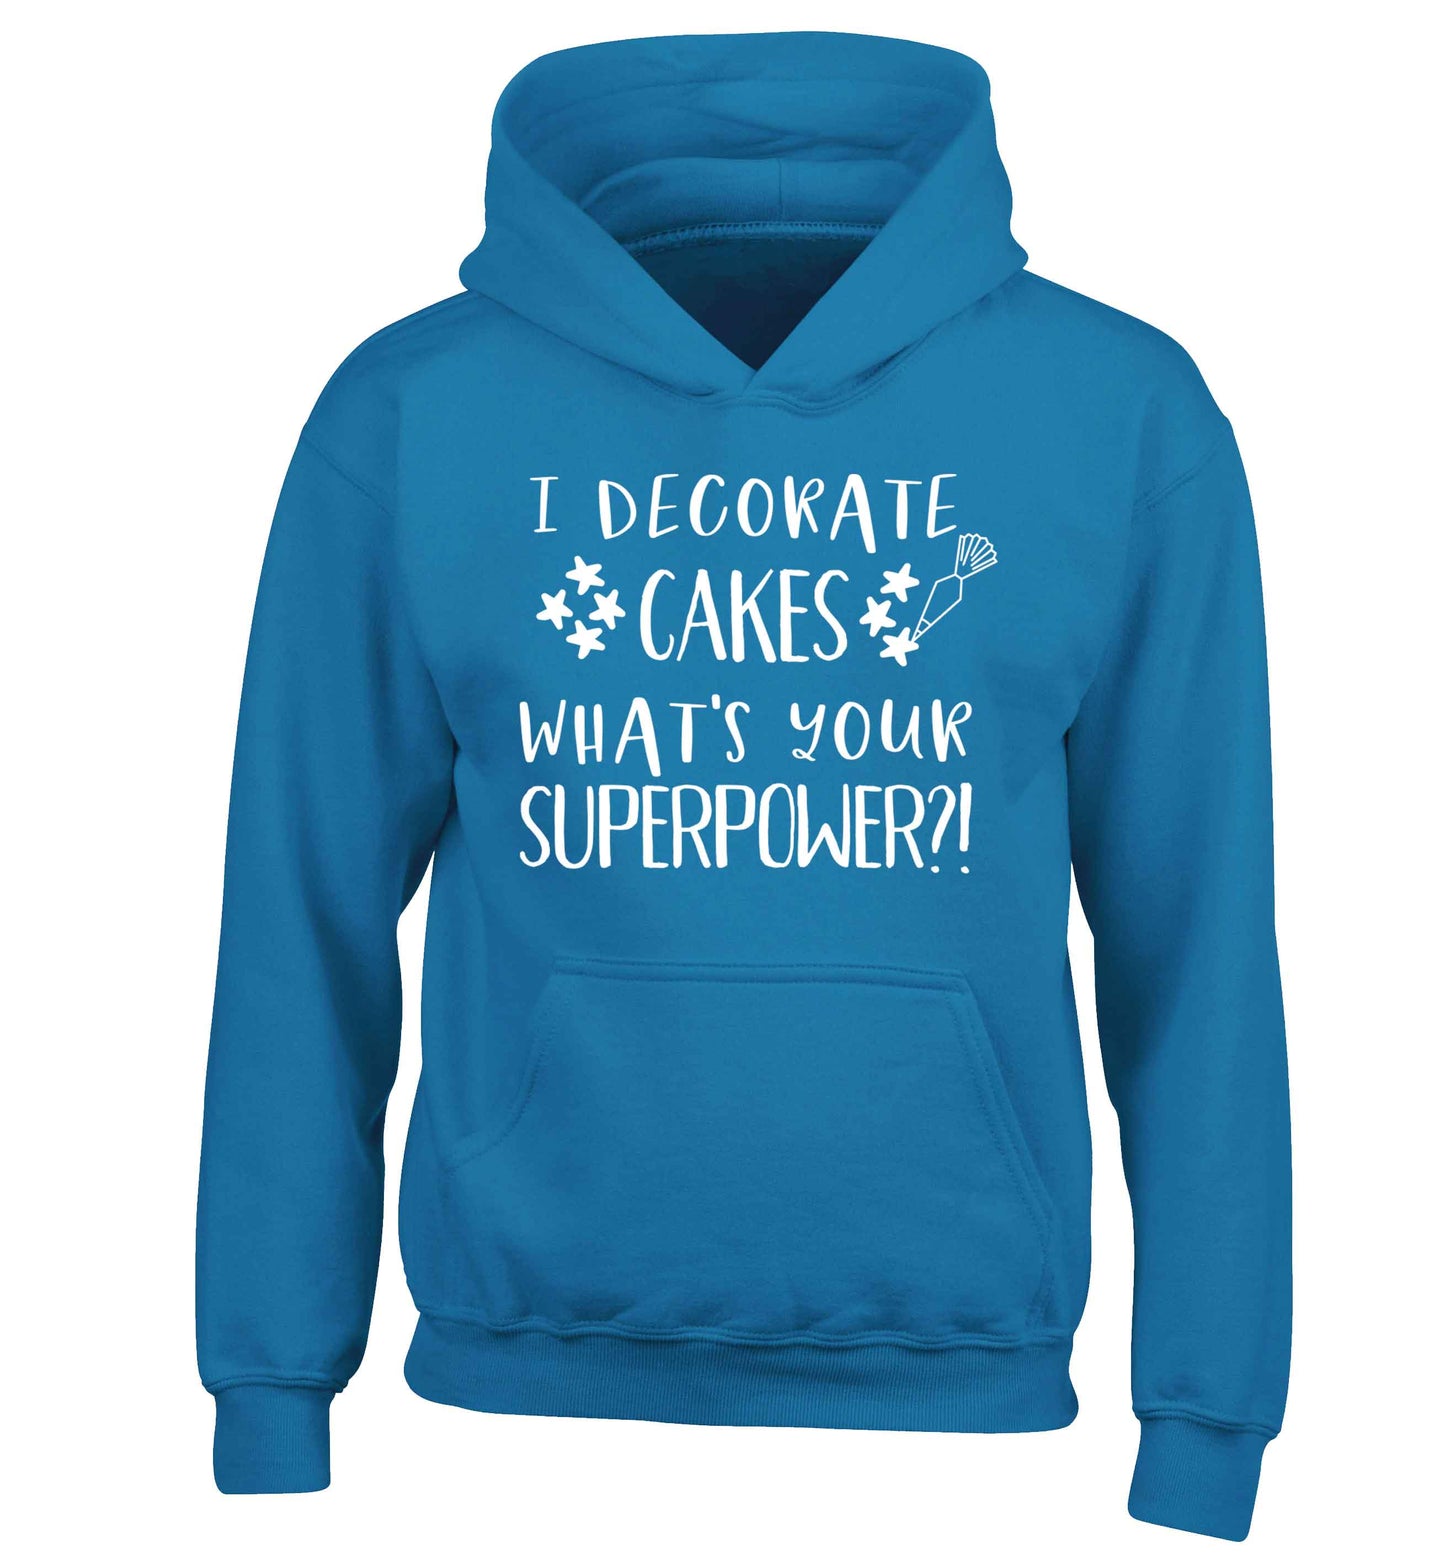 I decorate cakes what's your superpower?! children's blue hoodie 12-13 Years